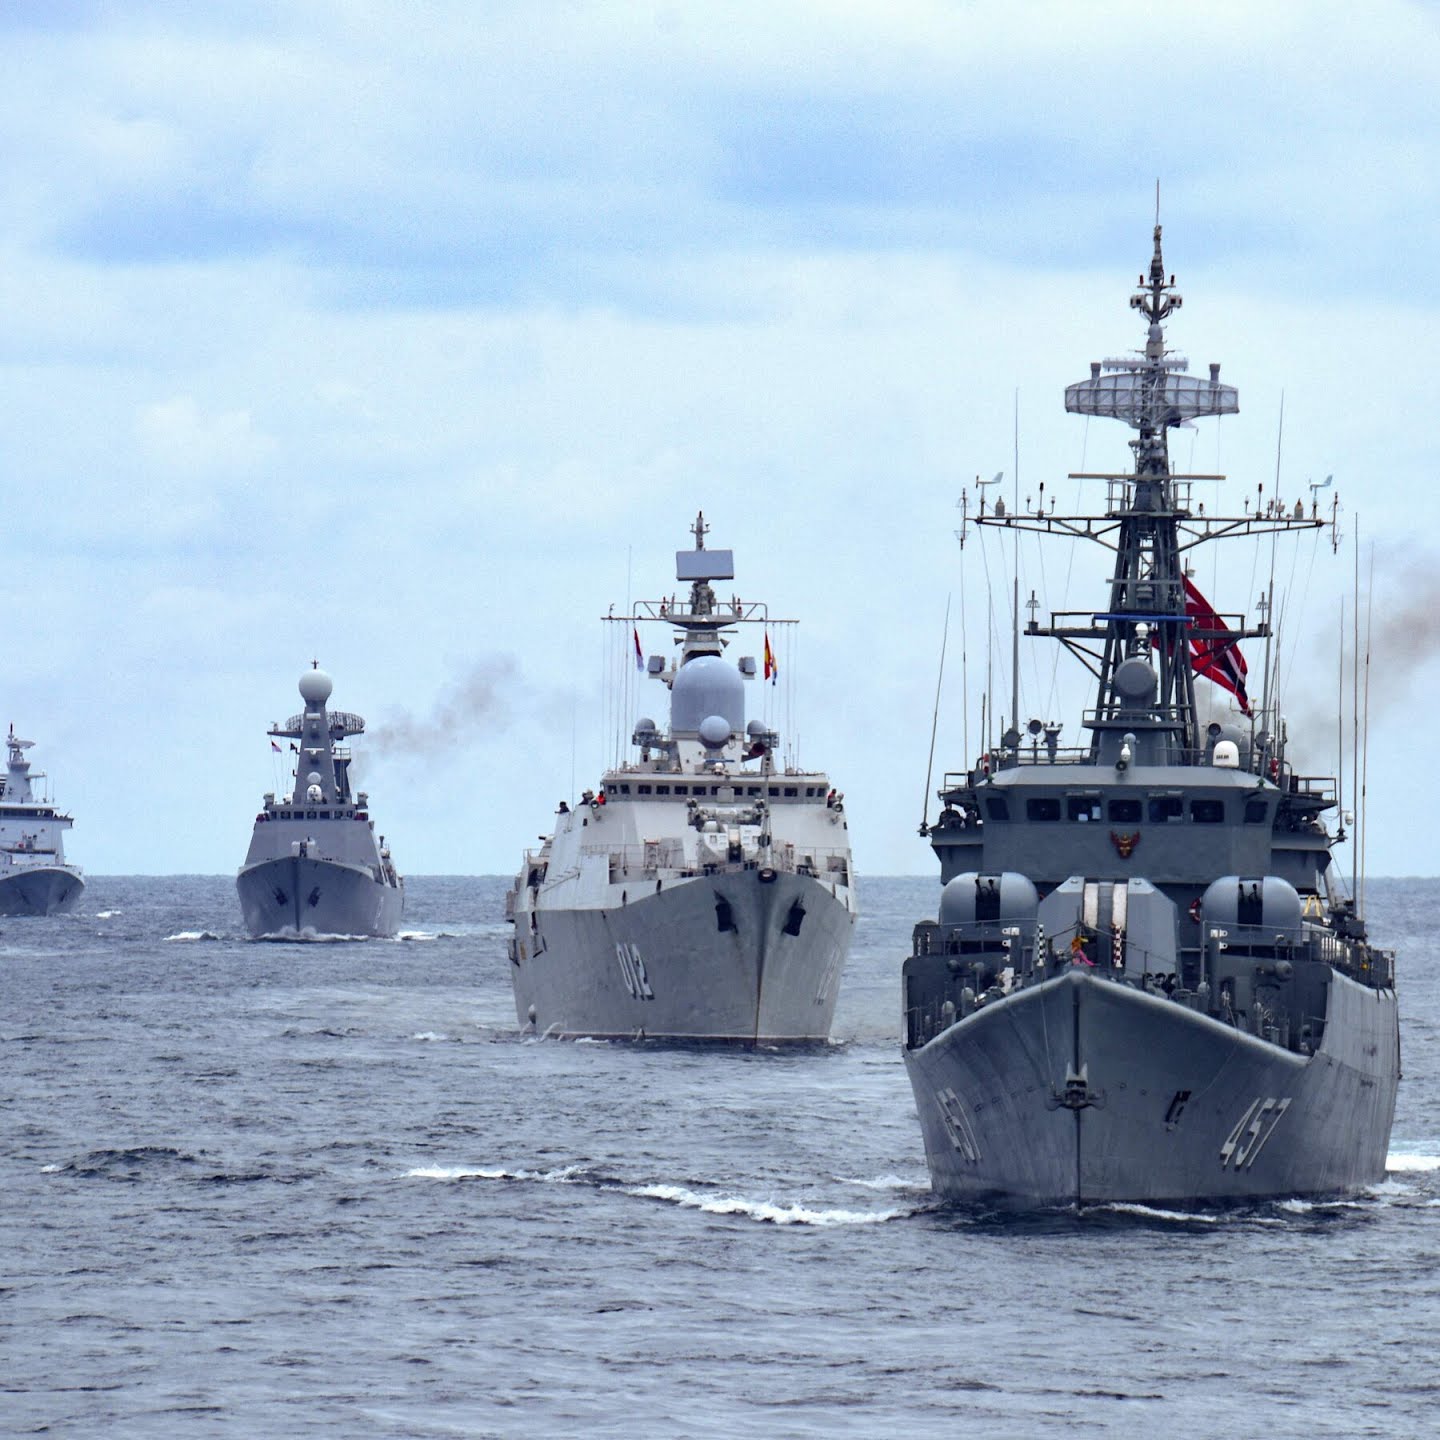 Ships in December 2021 off Jakarta taking part in a joint naval exercise with Indonesia, other ASEAN members and Russia.